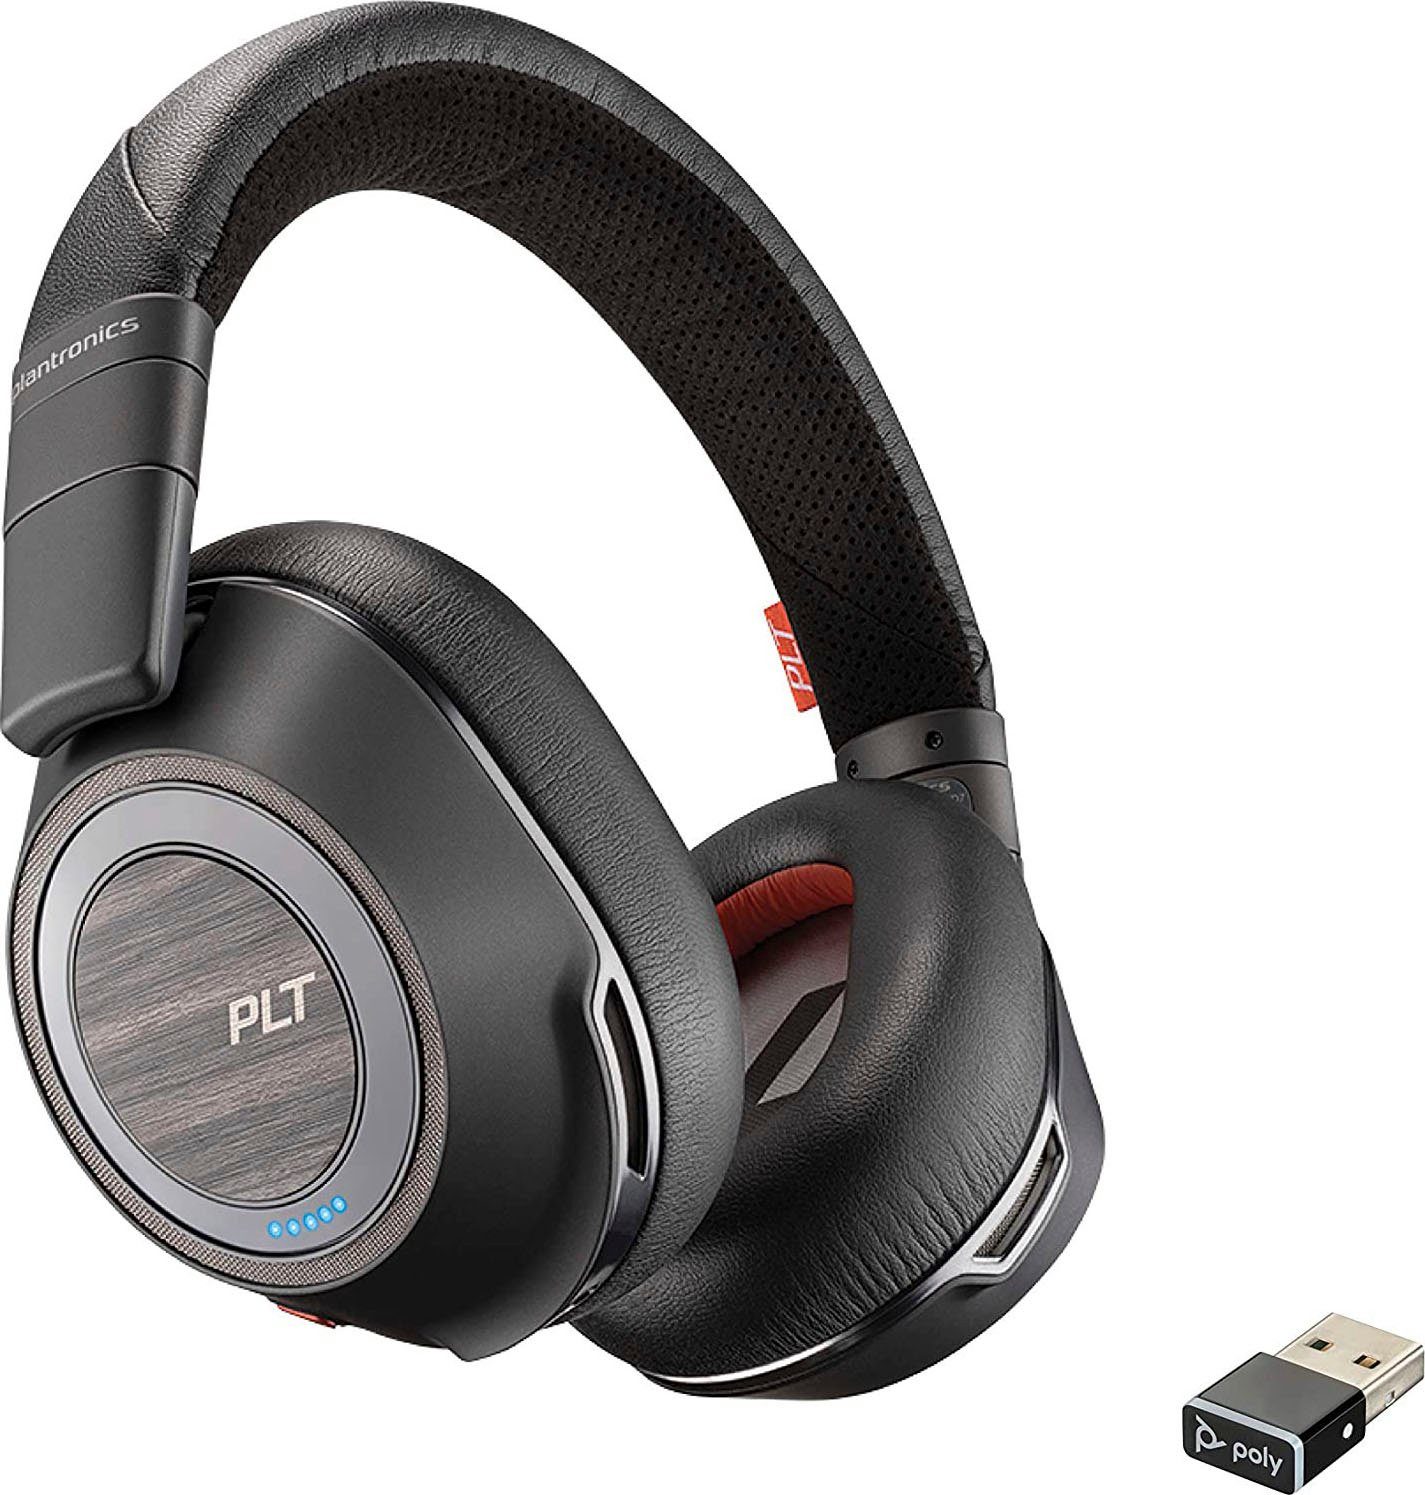 Remote (Audio Profile), Plantronics Distribution Bluetooth Bluetooth integrierte 8200 (Noise-Cancelling, HFP, Video A2DP Wireless-Headset Profile), Voyager (Advanced Audio Anrufe UC Control Musik, AVRCP für Poly HSP) Steuerung und